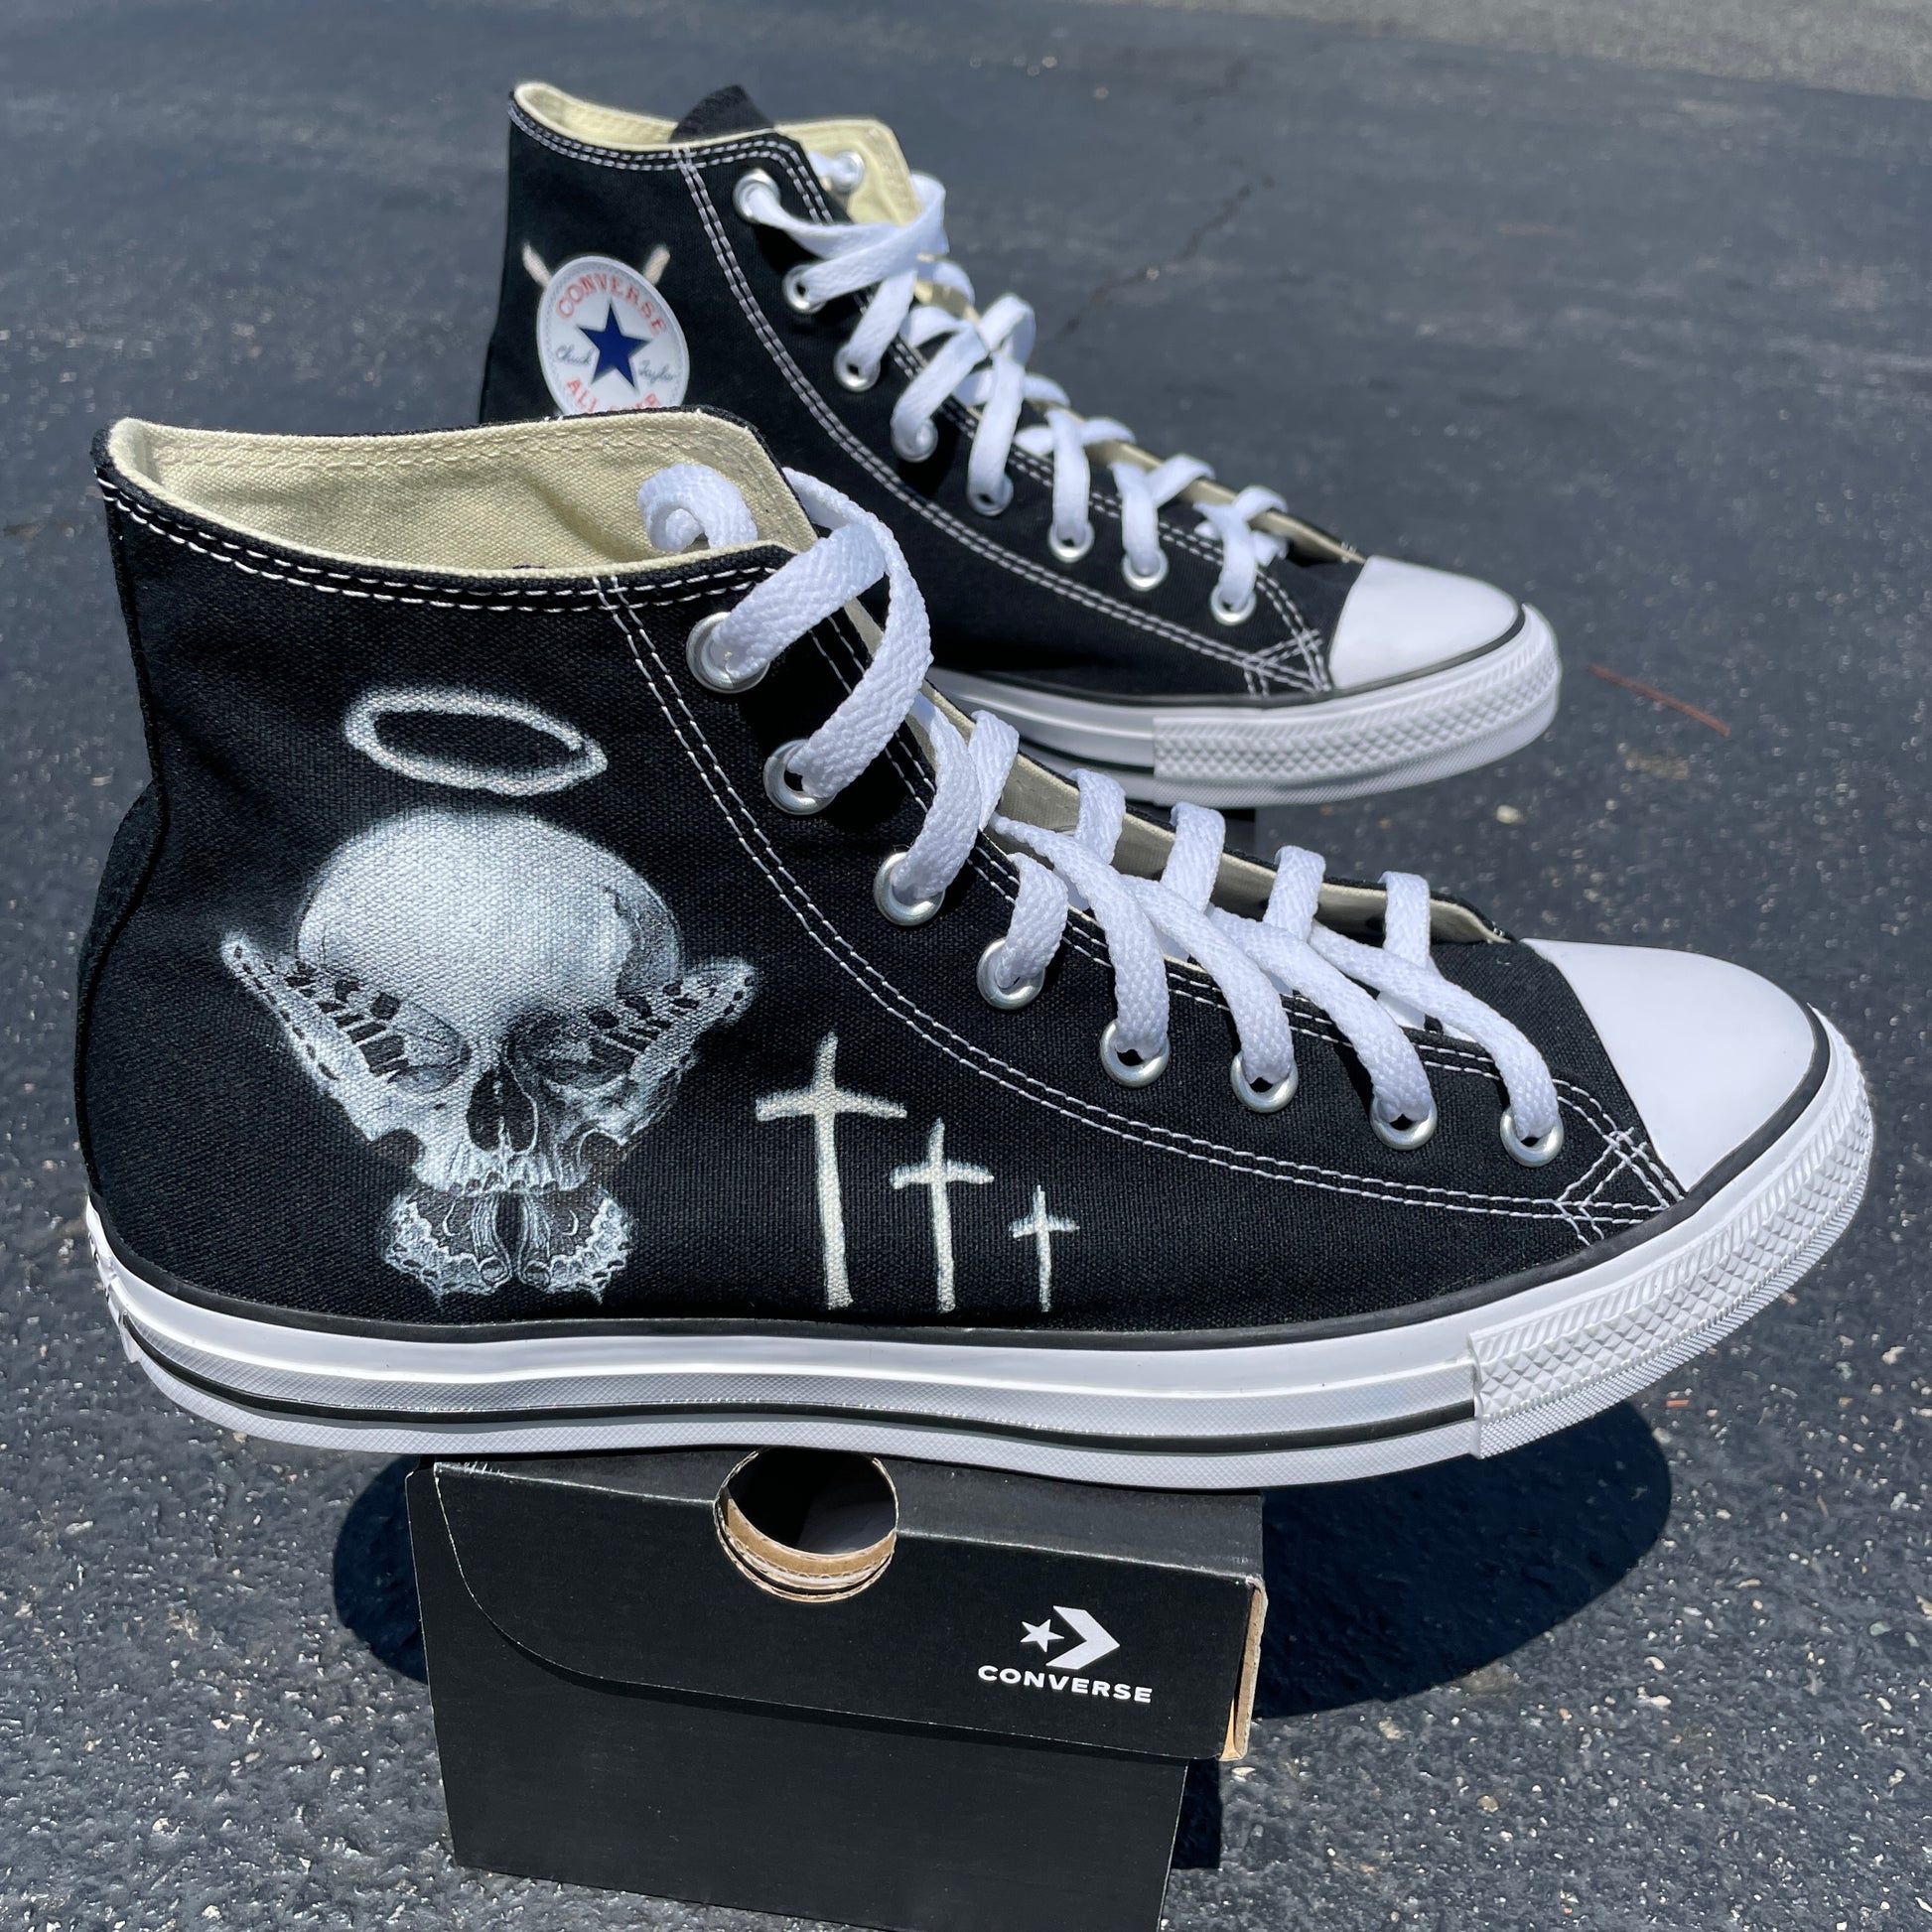 Consequential Clothing x Butterfly Effect Skull - Custom Converse